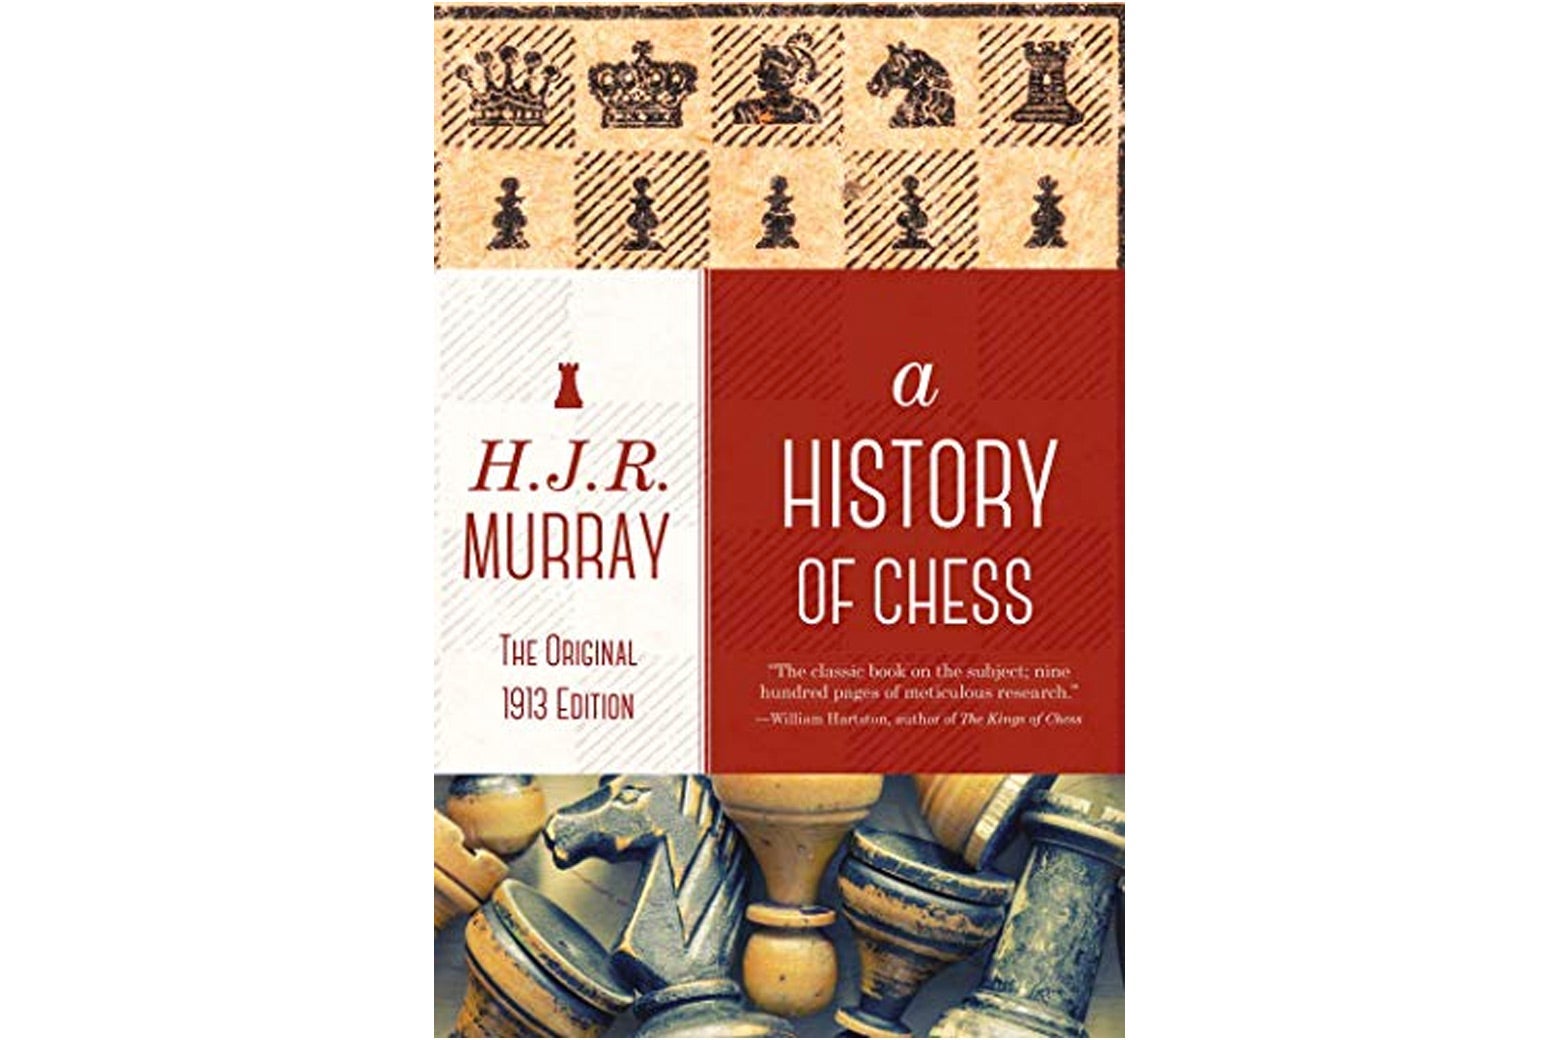 A History of Chess book jacket